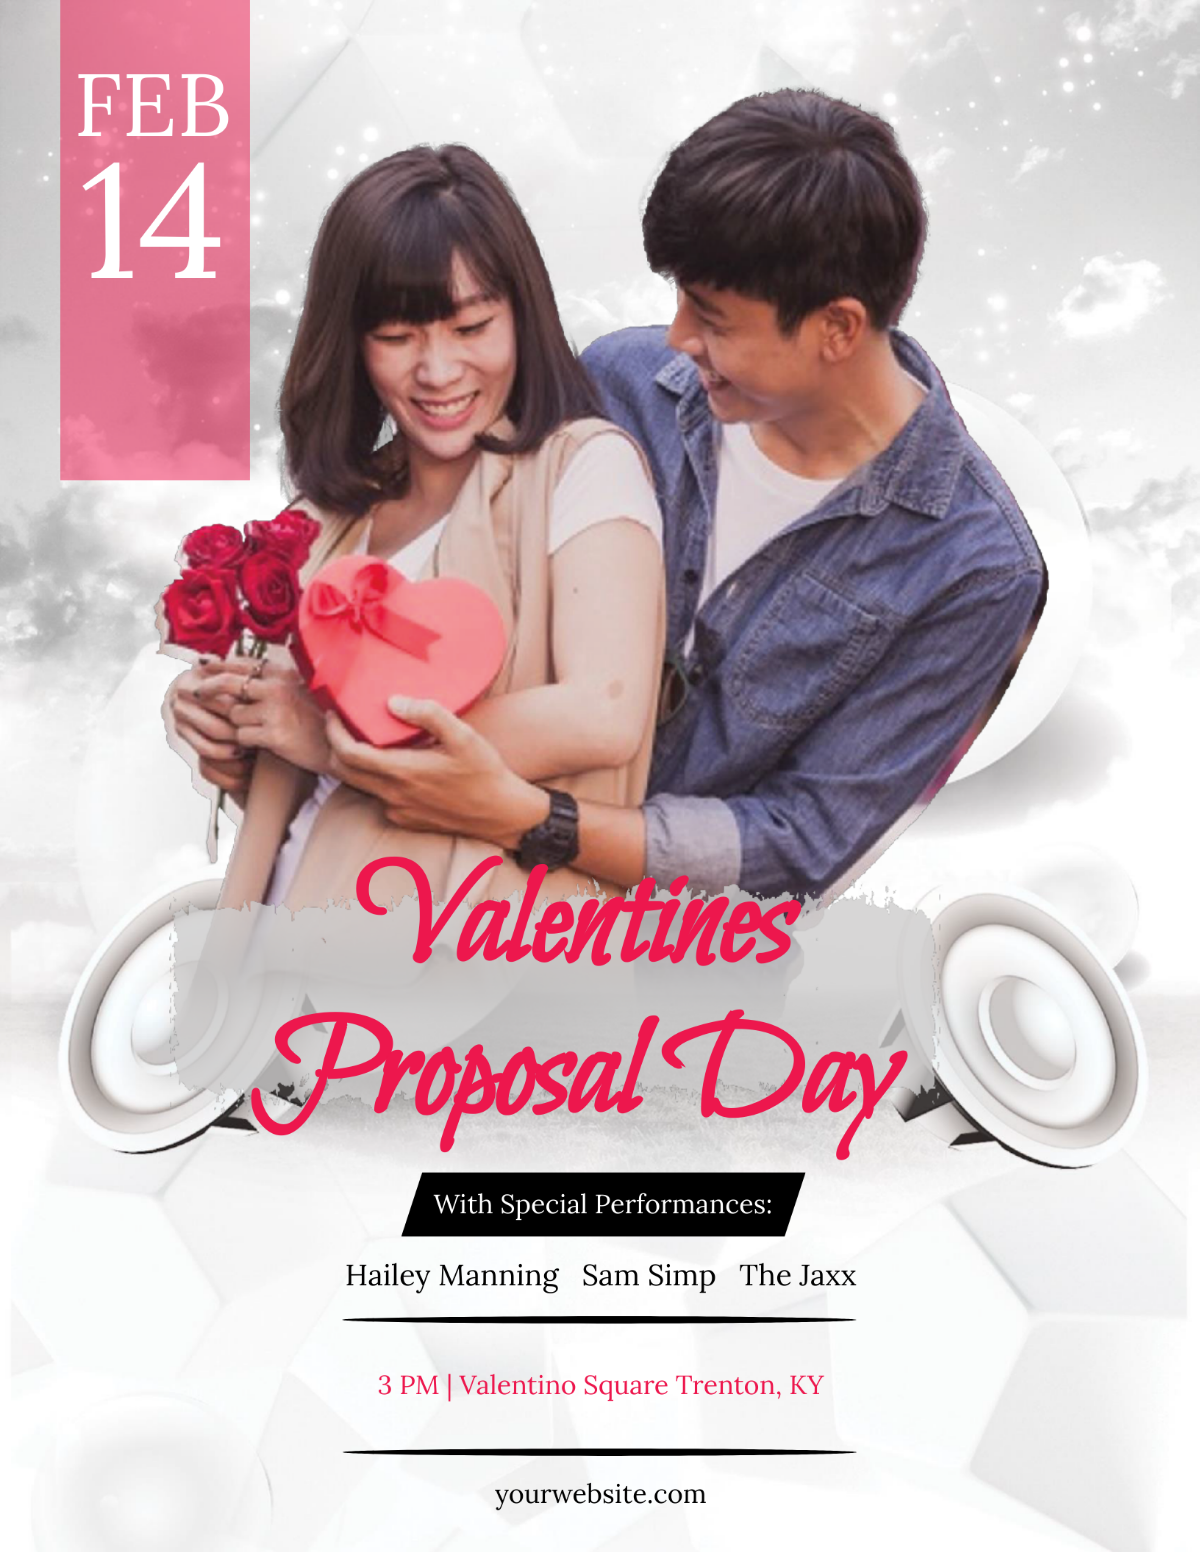 Free Valentine's Day Proposal Flyer Template